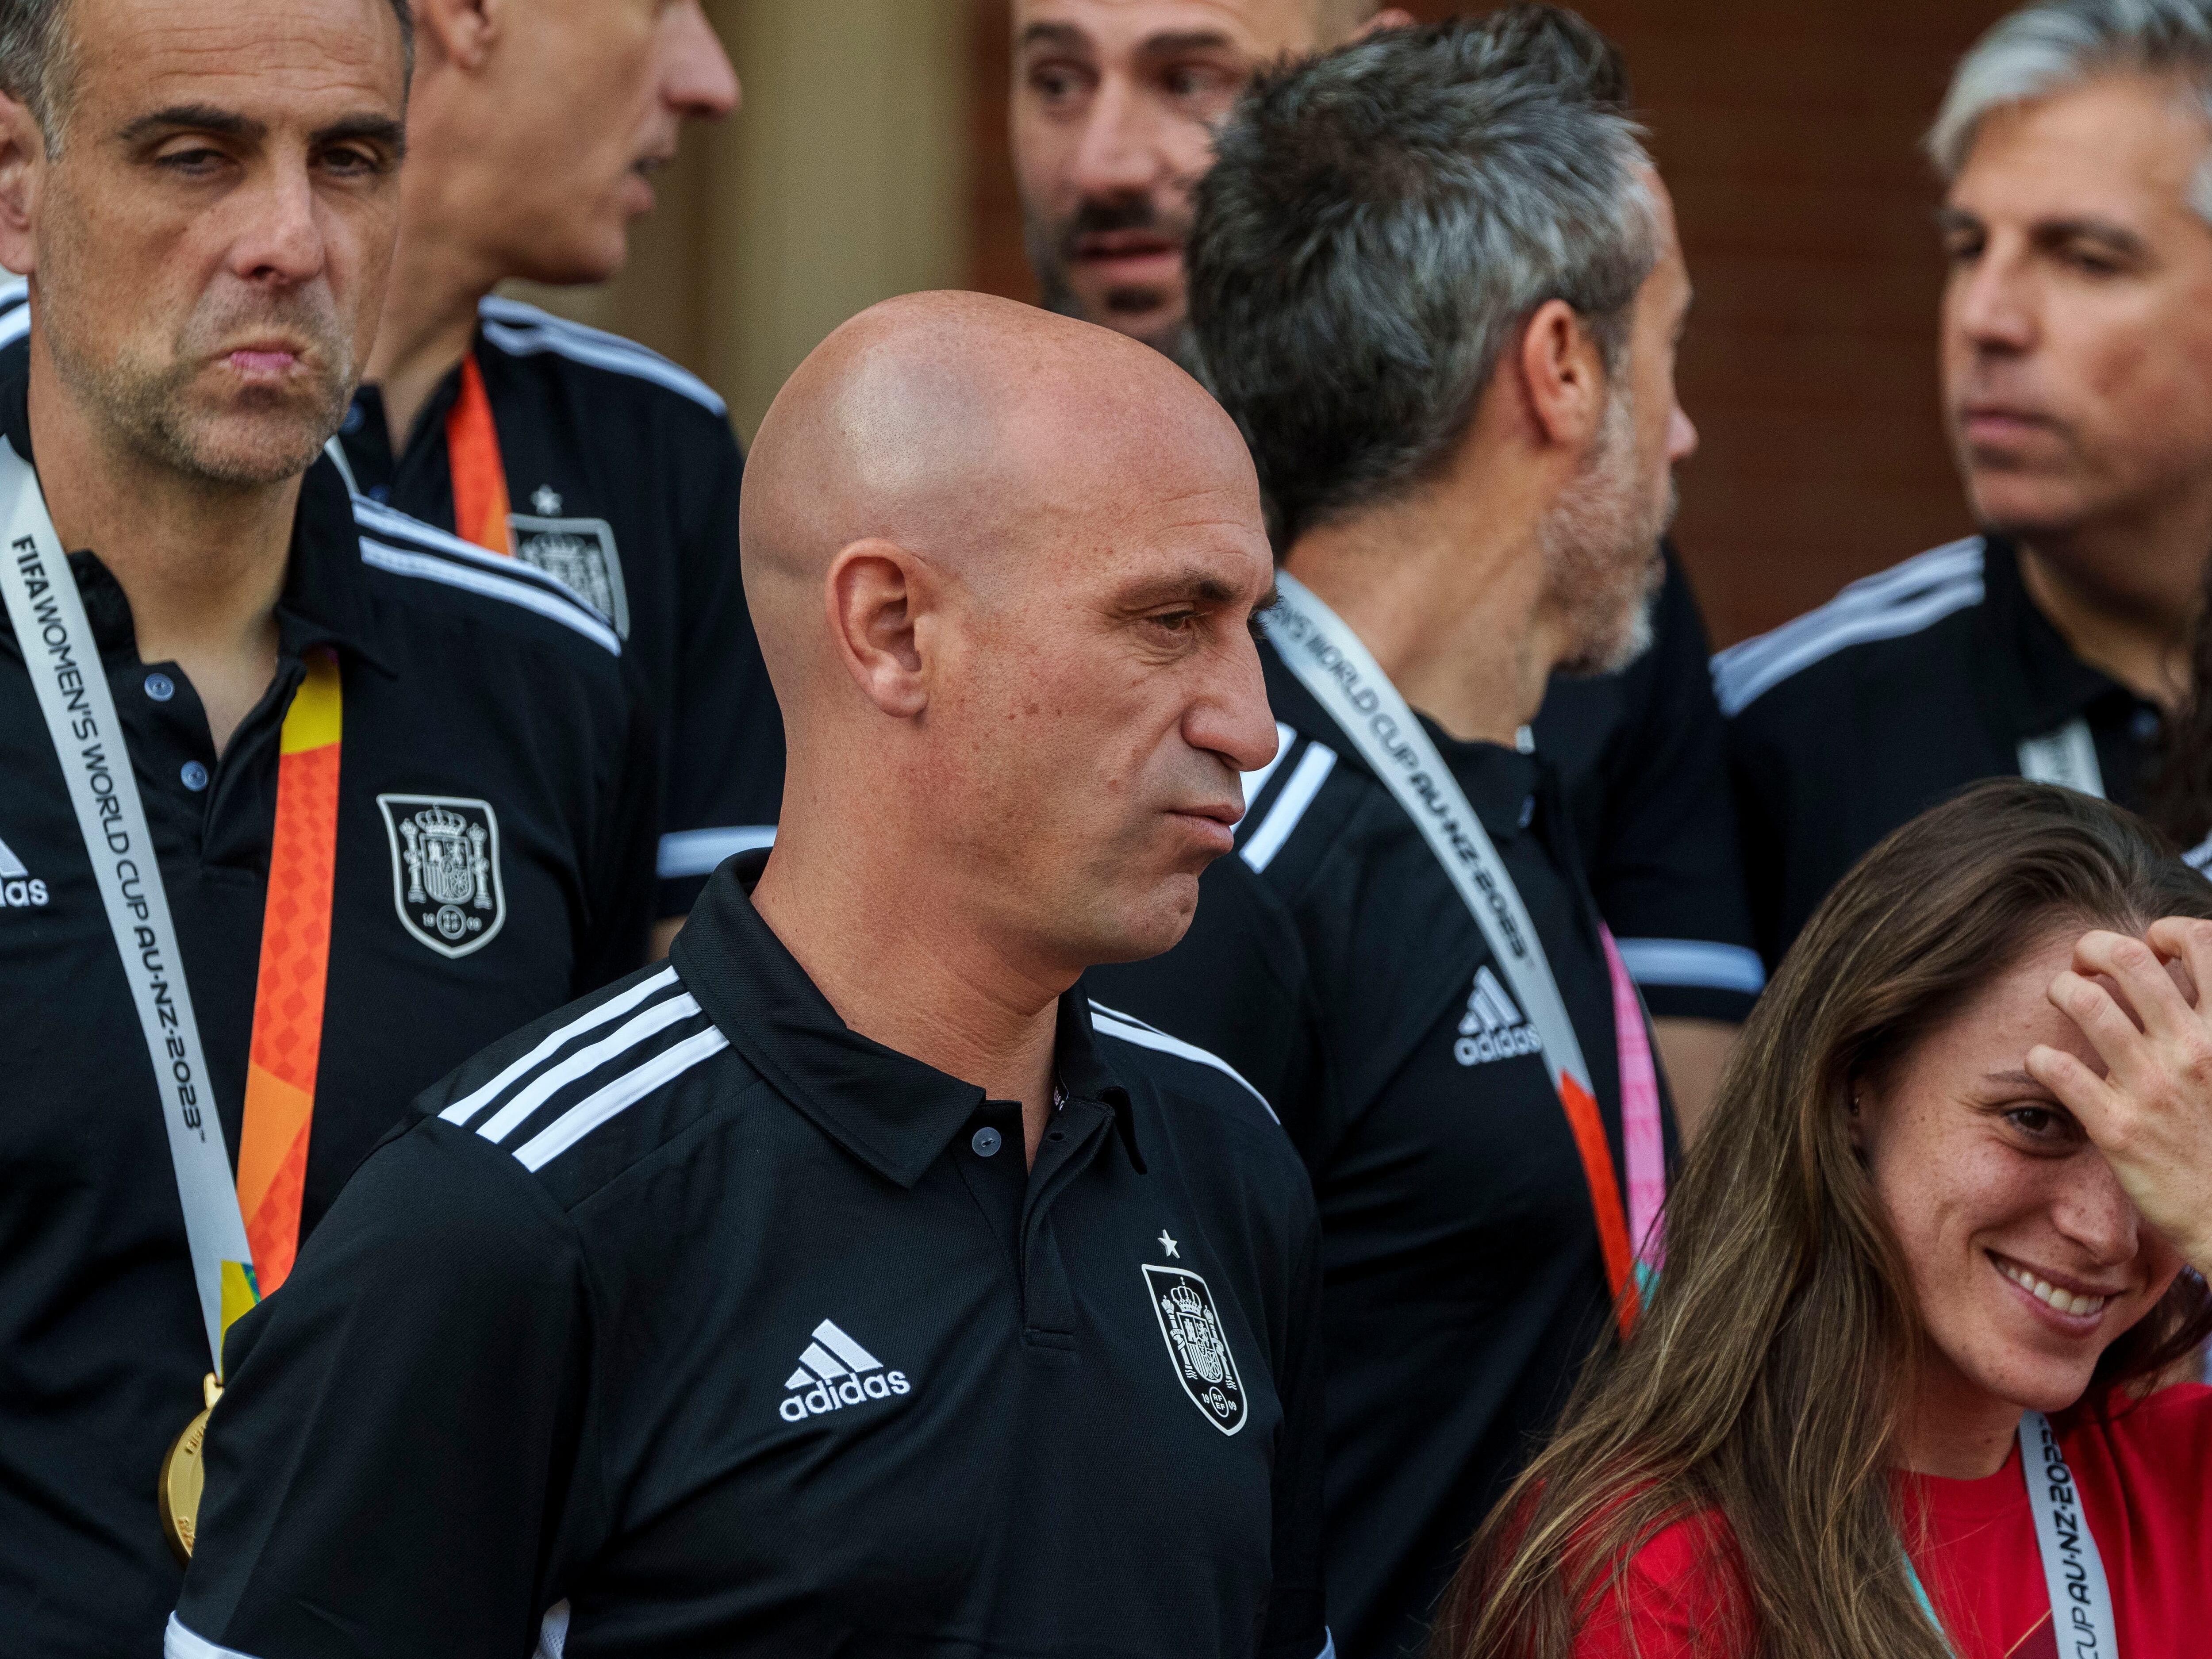 Spain’s acting PM slams soccer federation chief for kissing World Cup winner